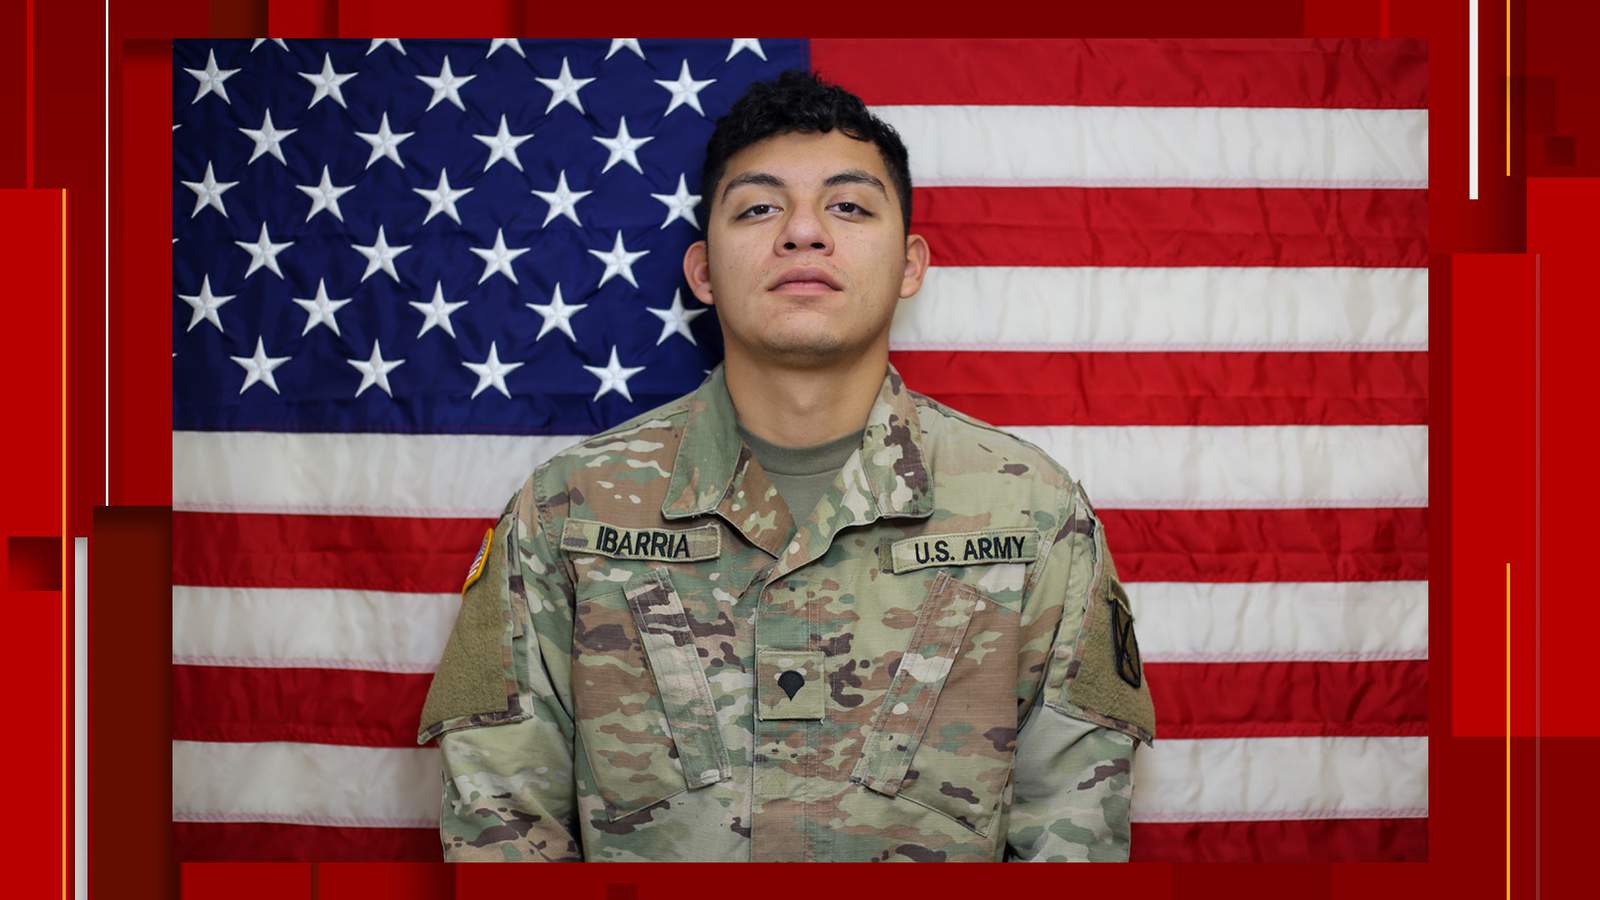 He will be severely missed,: Division mourns loss of San Antonio soldier killed in rollover crash